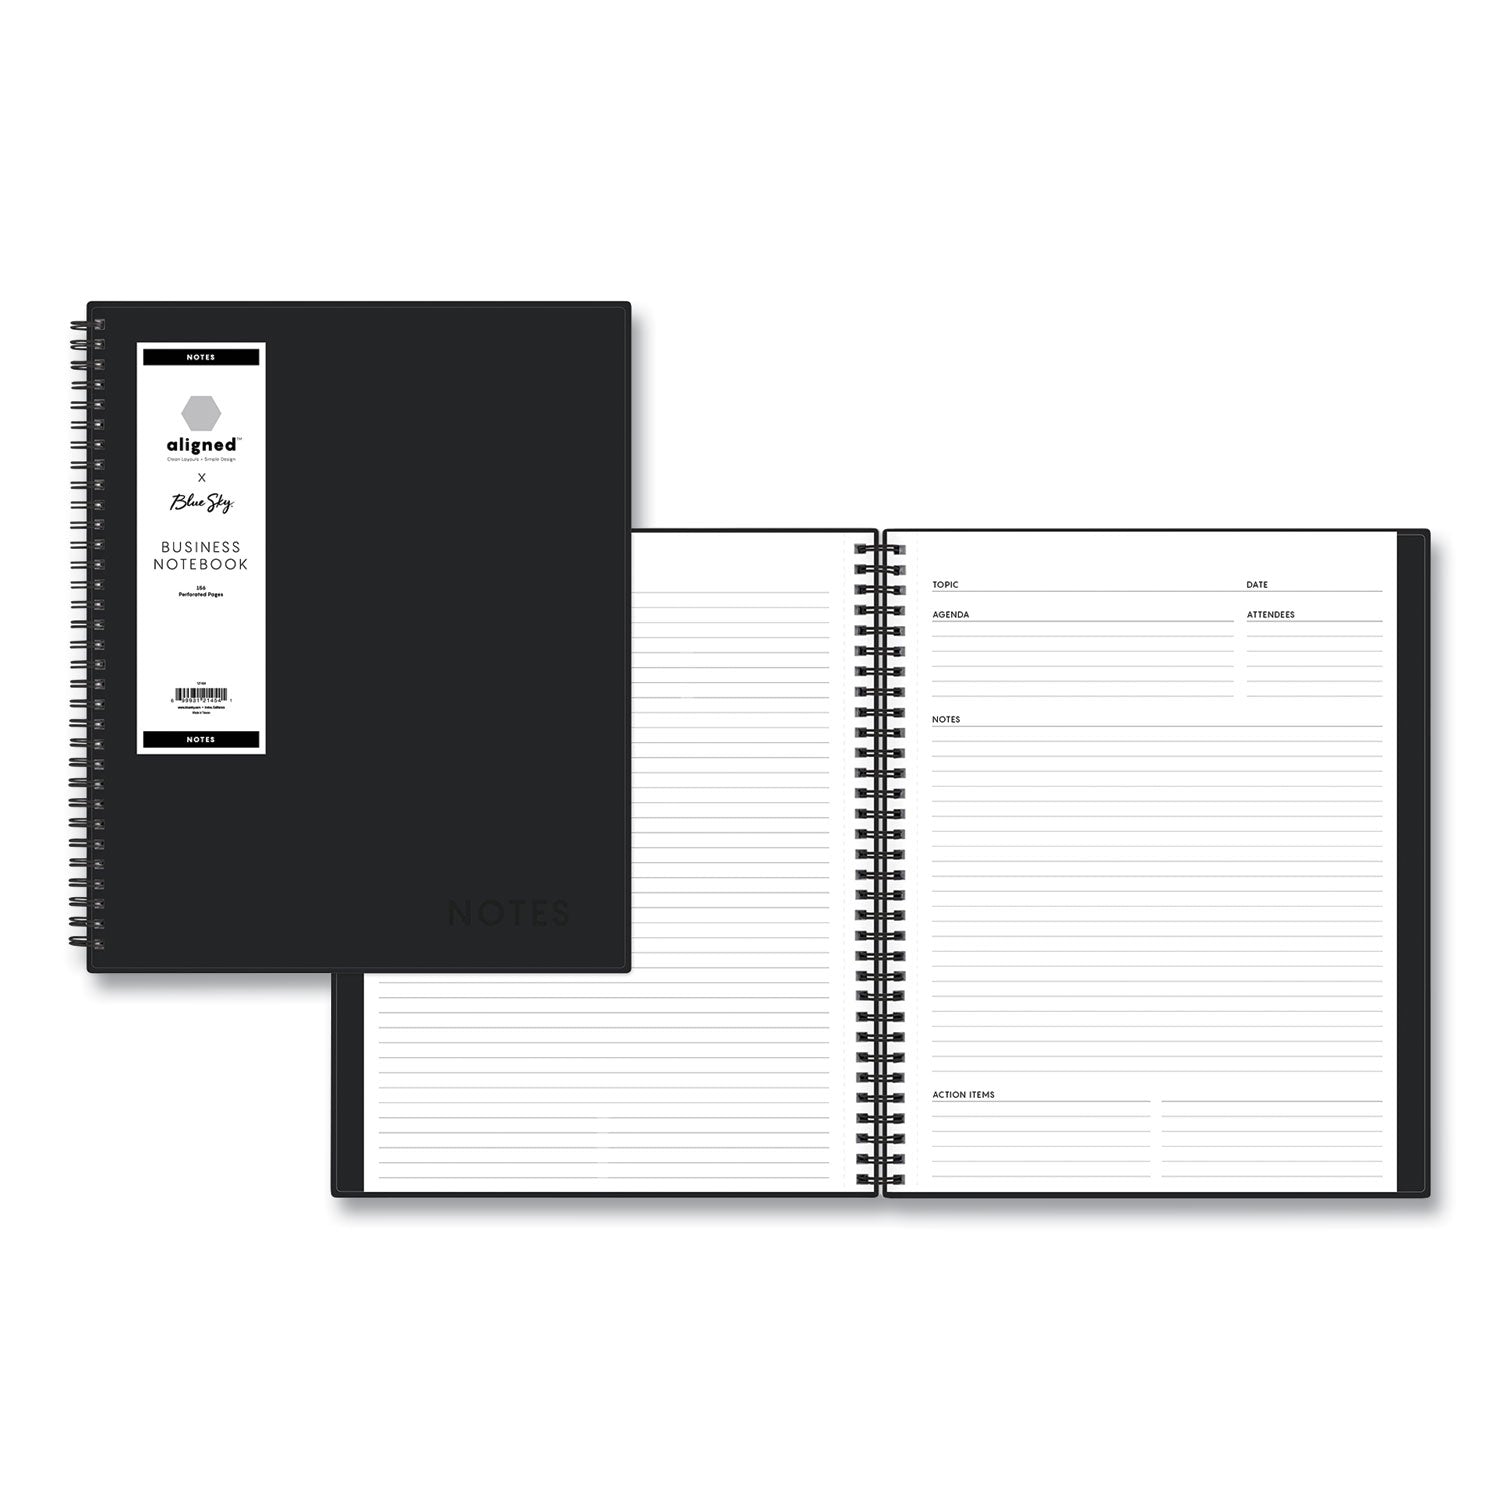 aligned-business-notebook-1-subject-meeting-minutes-notes-format-with-narrow-rule-black-cover-78-11-x-85-sheets_bls121454 - 1